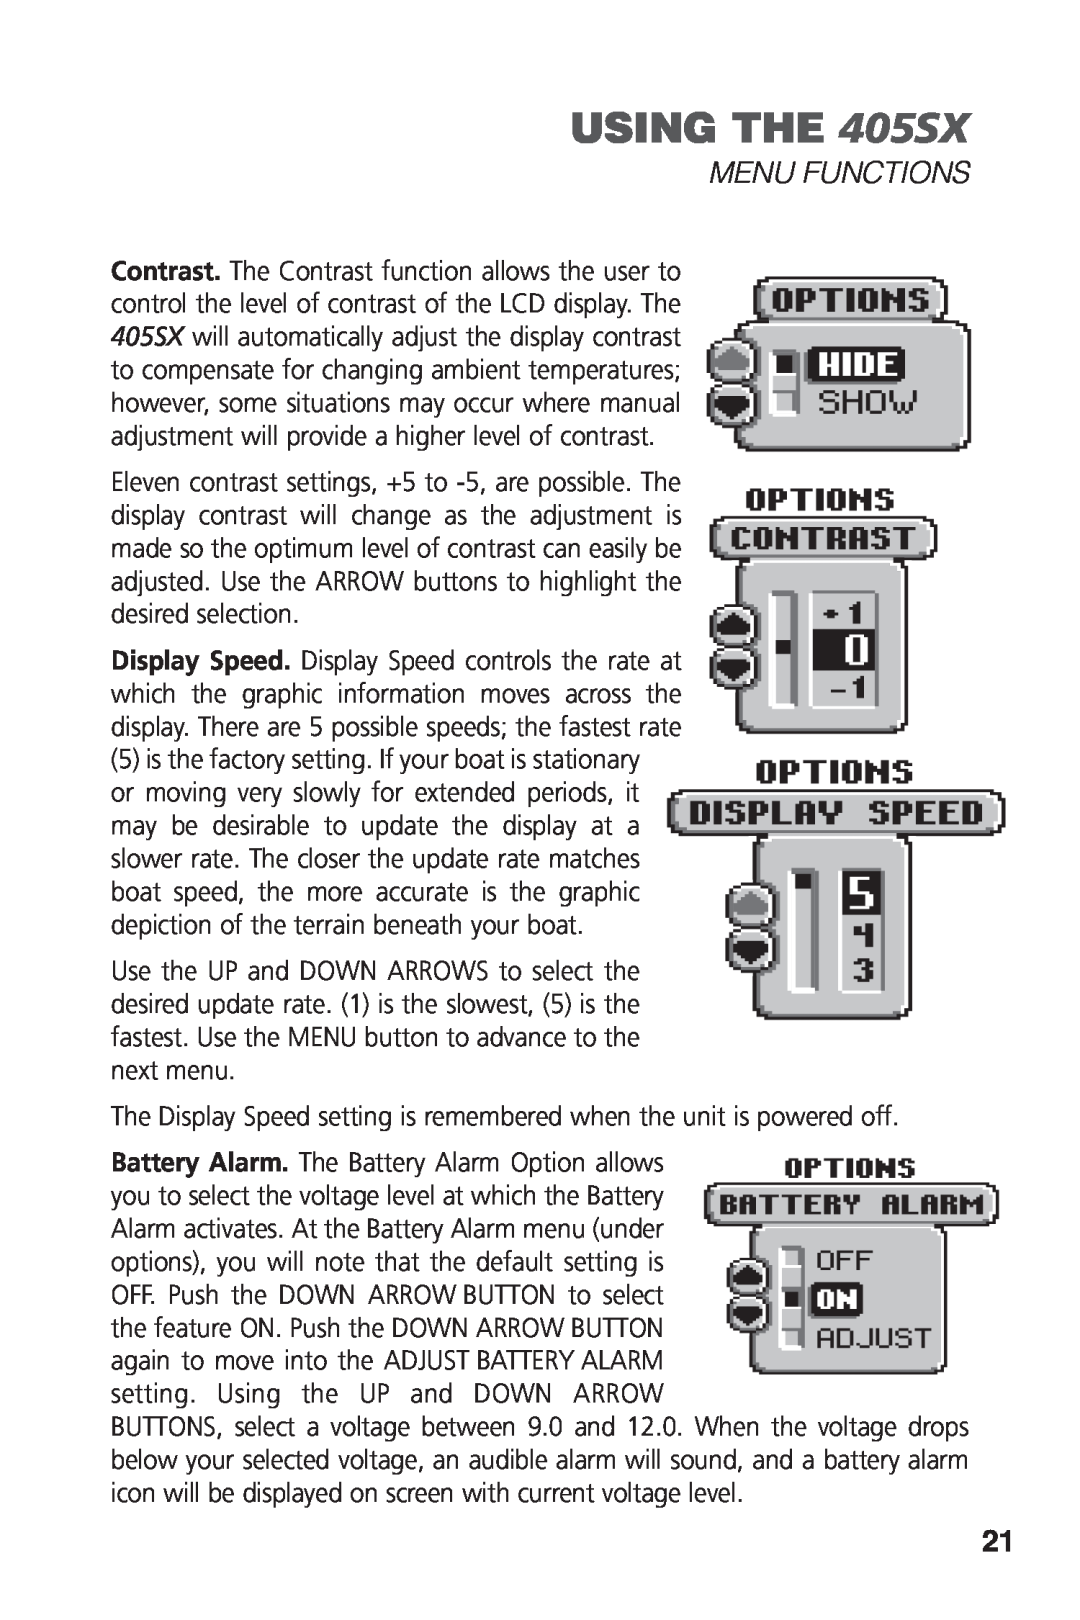 Humminbird manual USING THE 405SX, Menu Functions, The Display Speed setting is remembered when the unit is powered off 